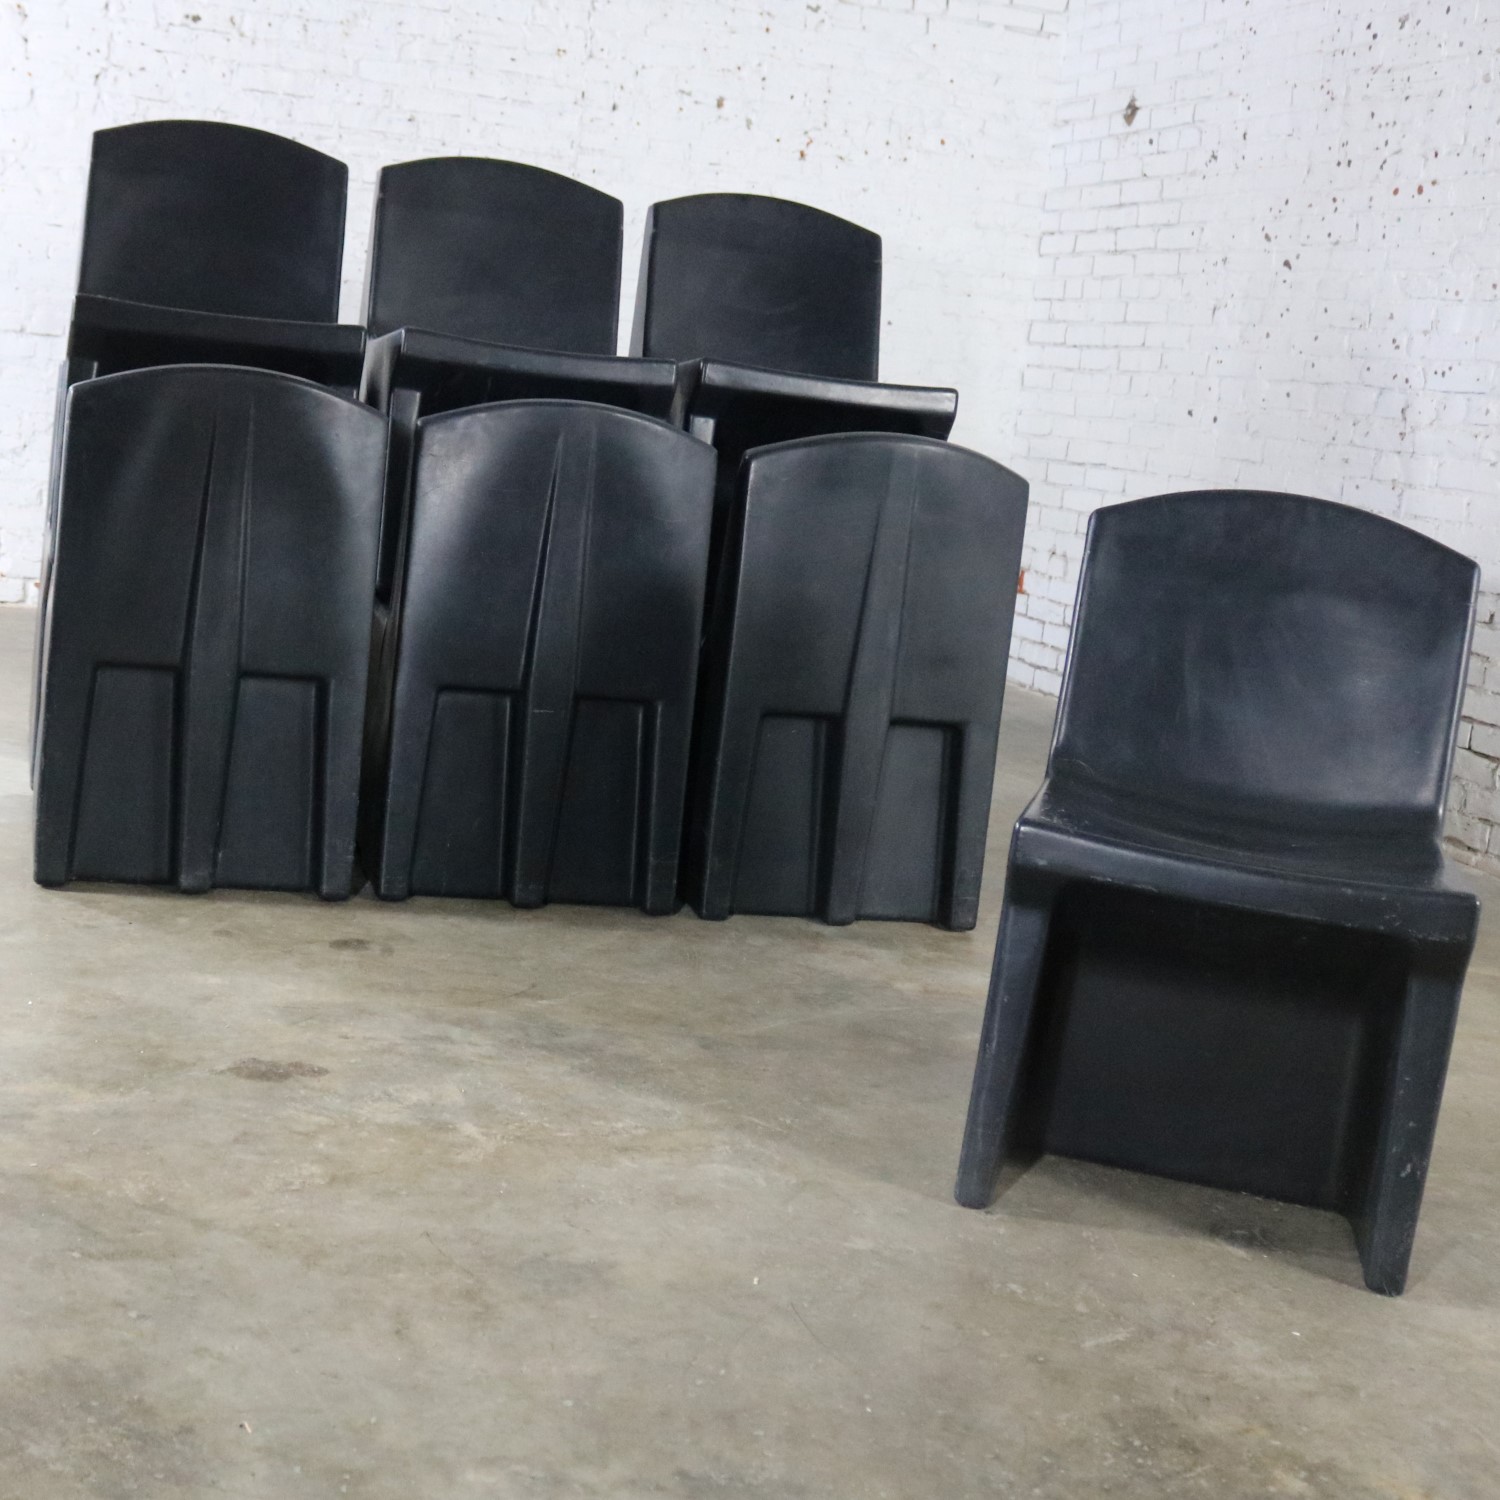 Black Molded Plastic Side or Slipper Chairs by Norix Set of Ten